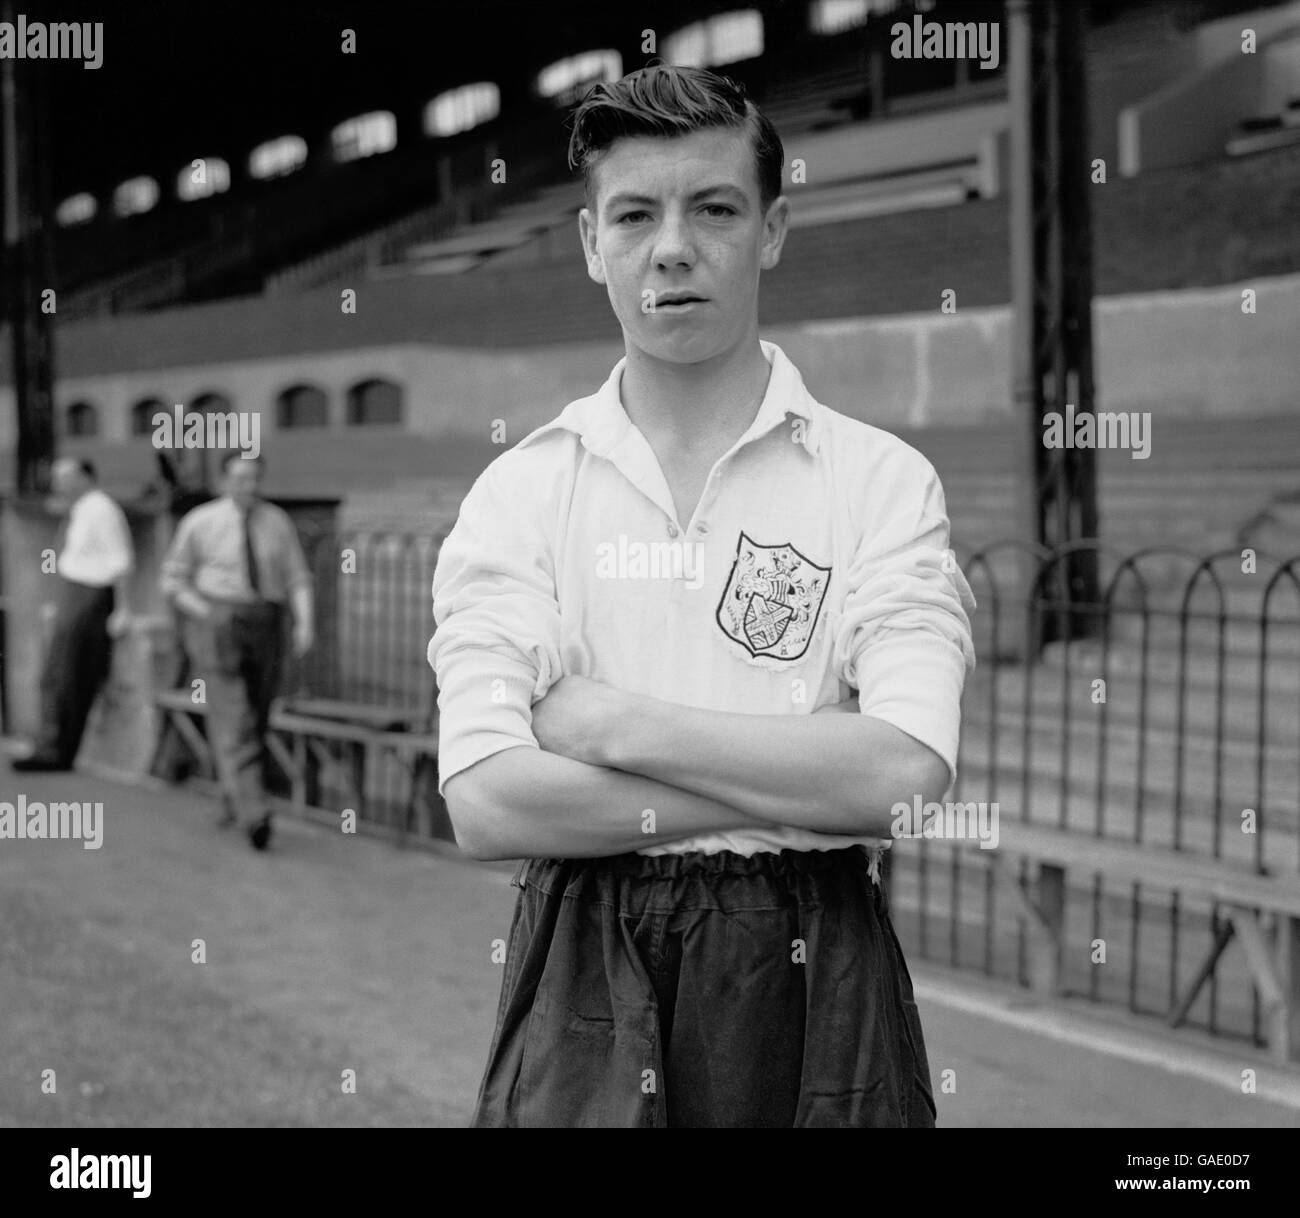 Soccer - Division One - Fulham - Johnny Haynes - 1950. 15 year old Johnny Haynes of Fulham Football Club. Stock Photo